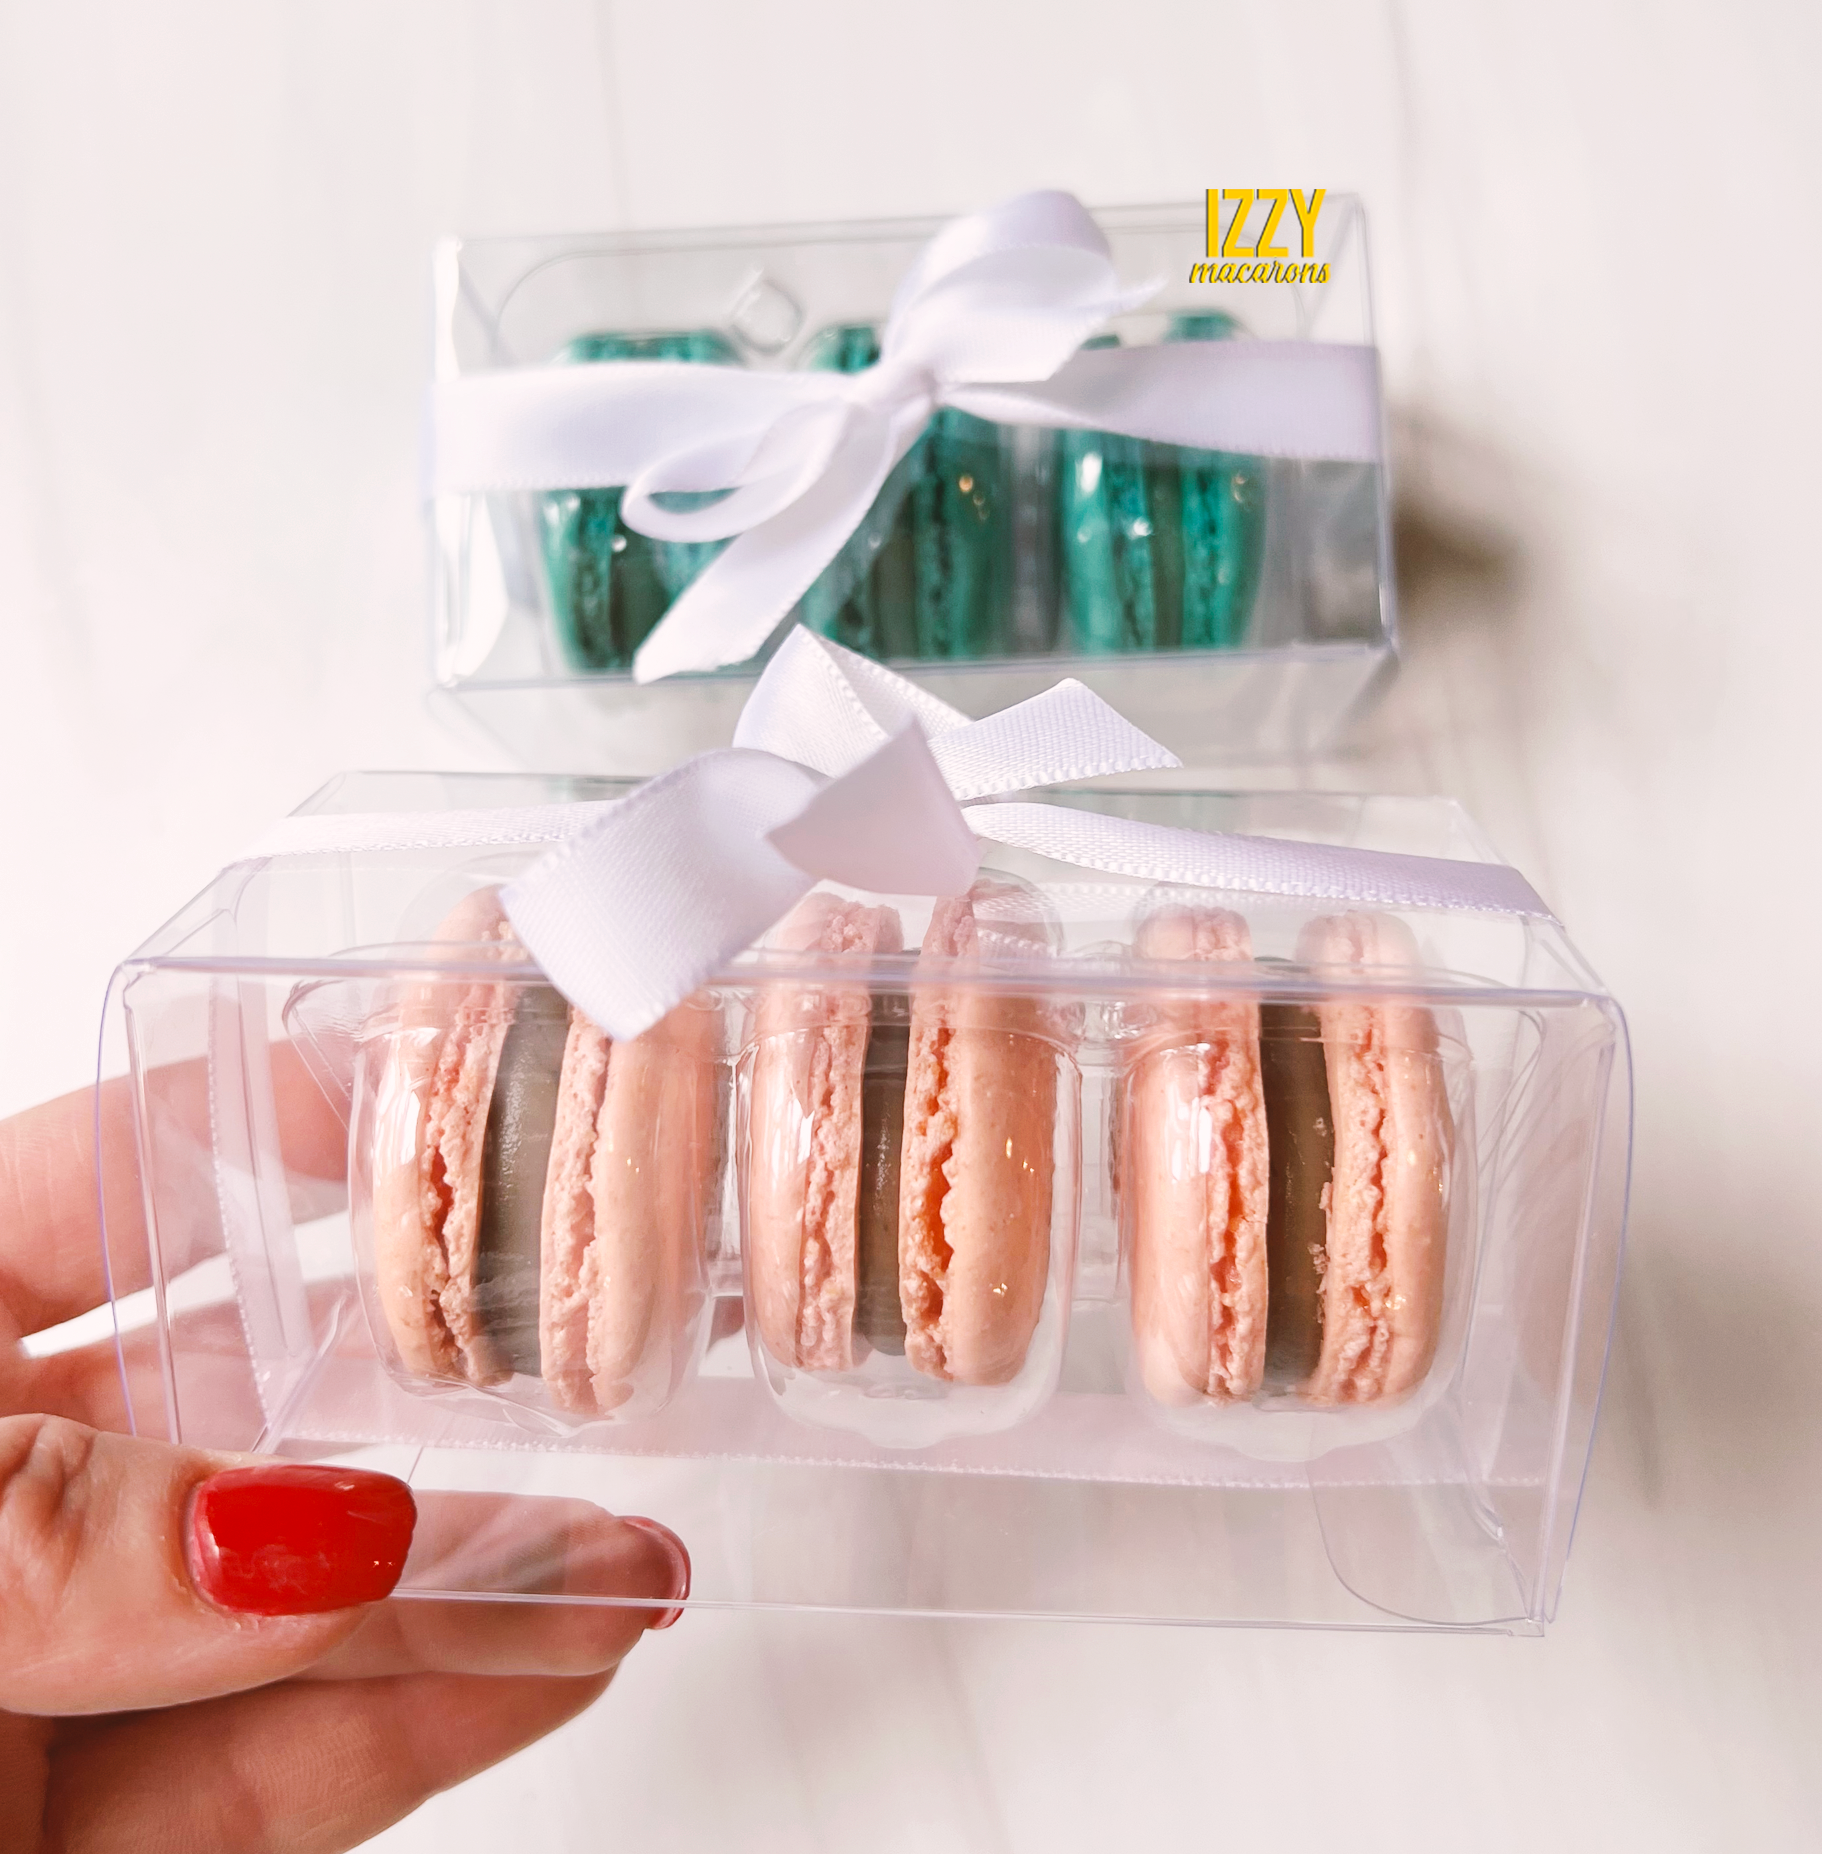 Macaron party favors of 3